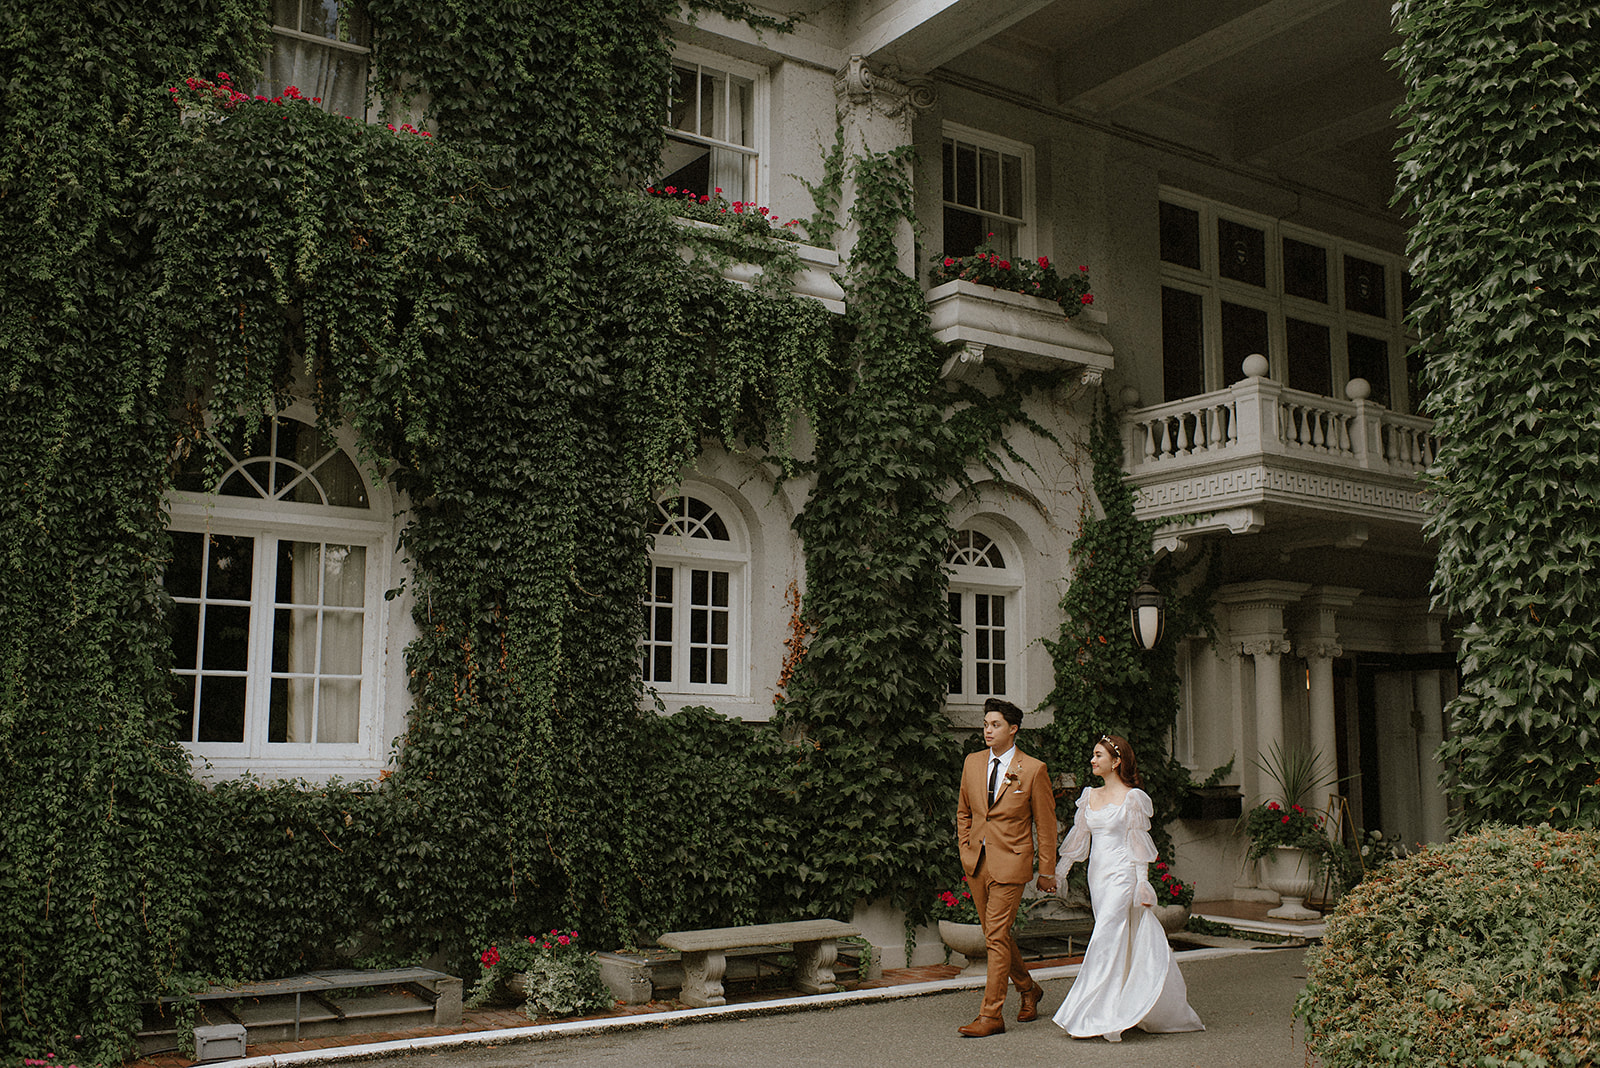 Vancouver Wedding Photographer captures wedding of couple in love at Hycroft Manor